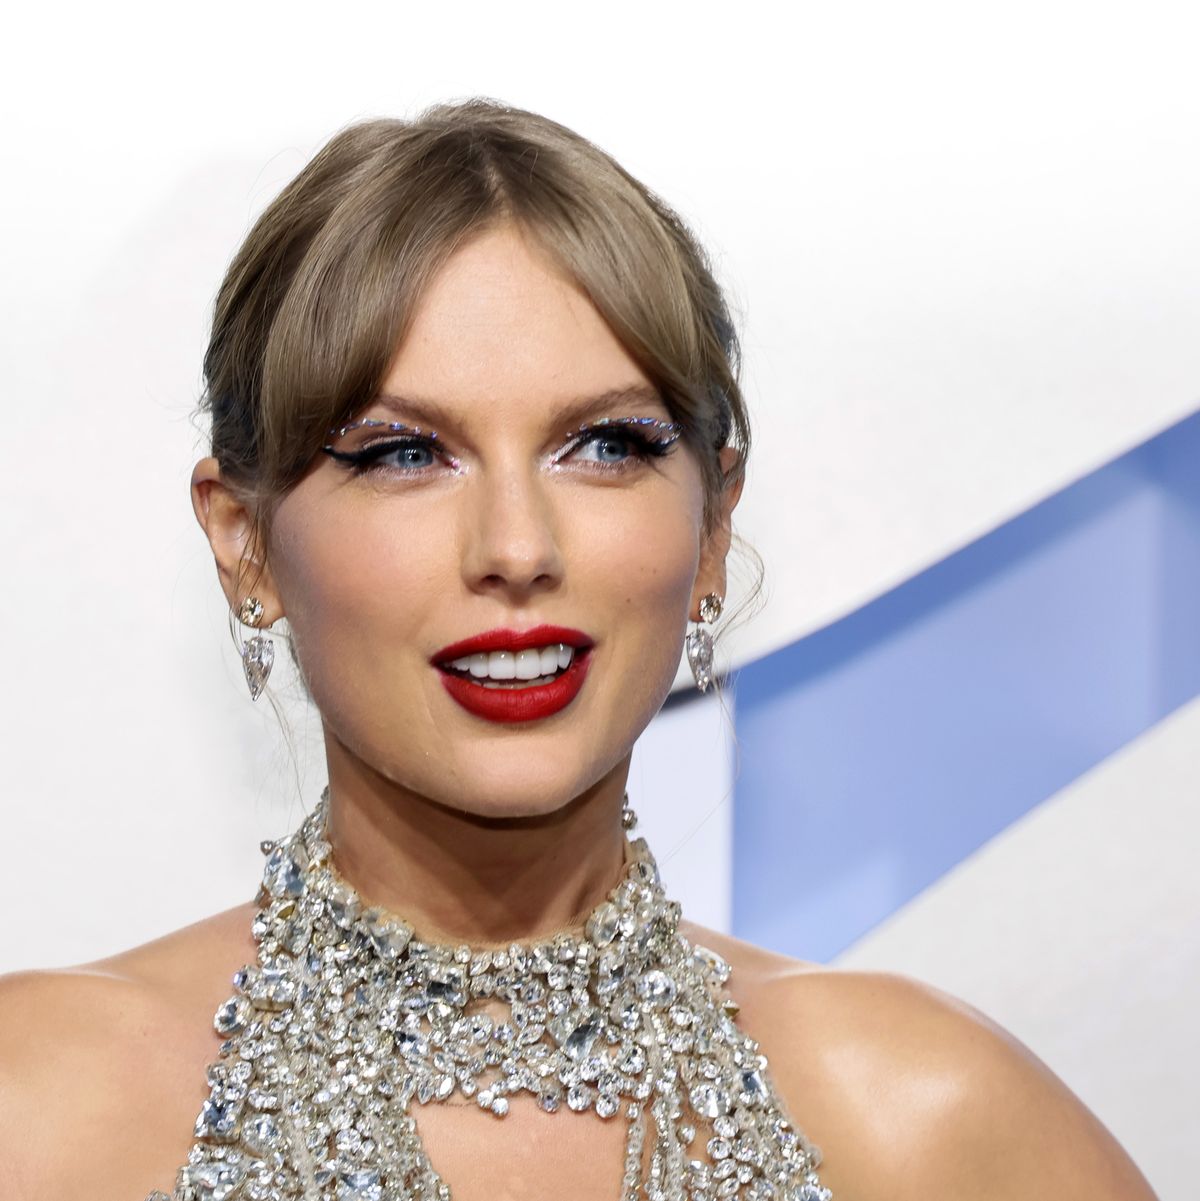 Taylor Swift's Net Worth: How The Star Makes Her Money